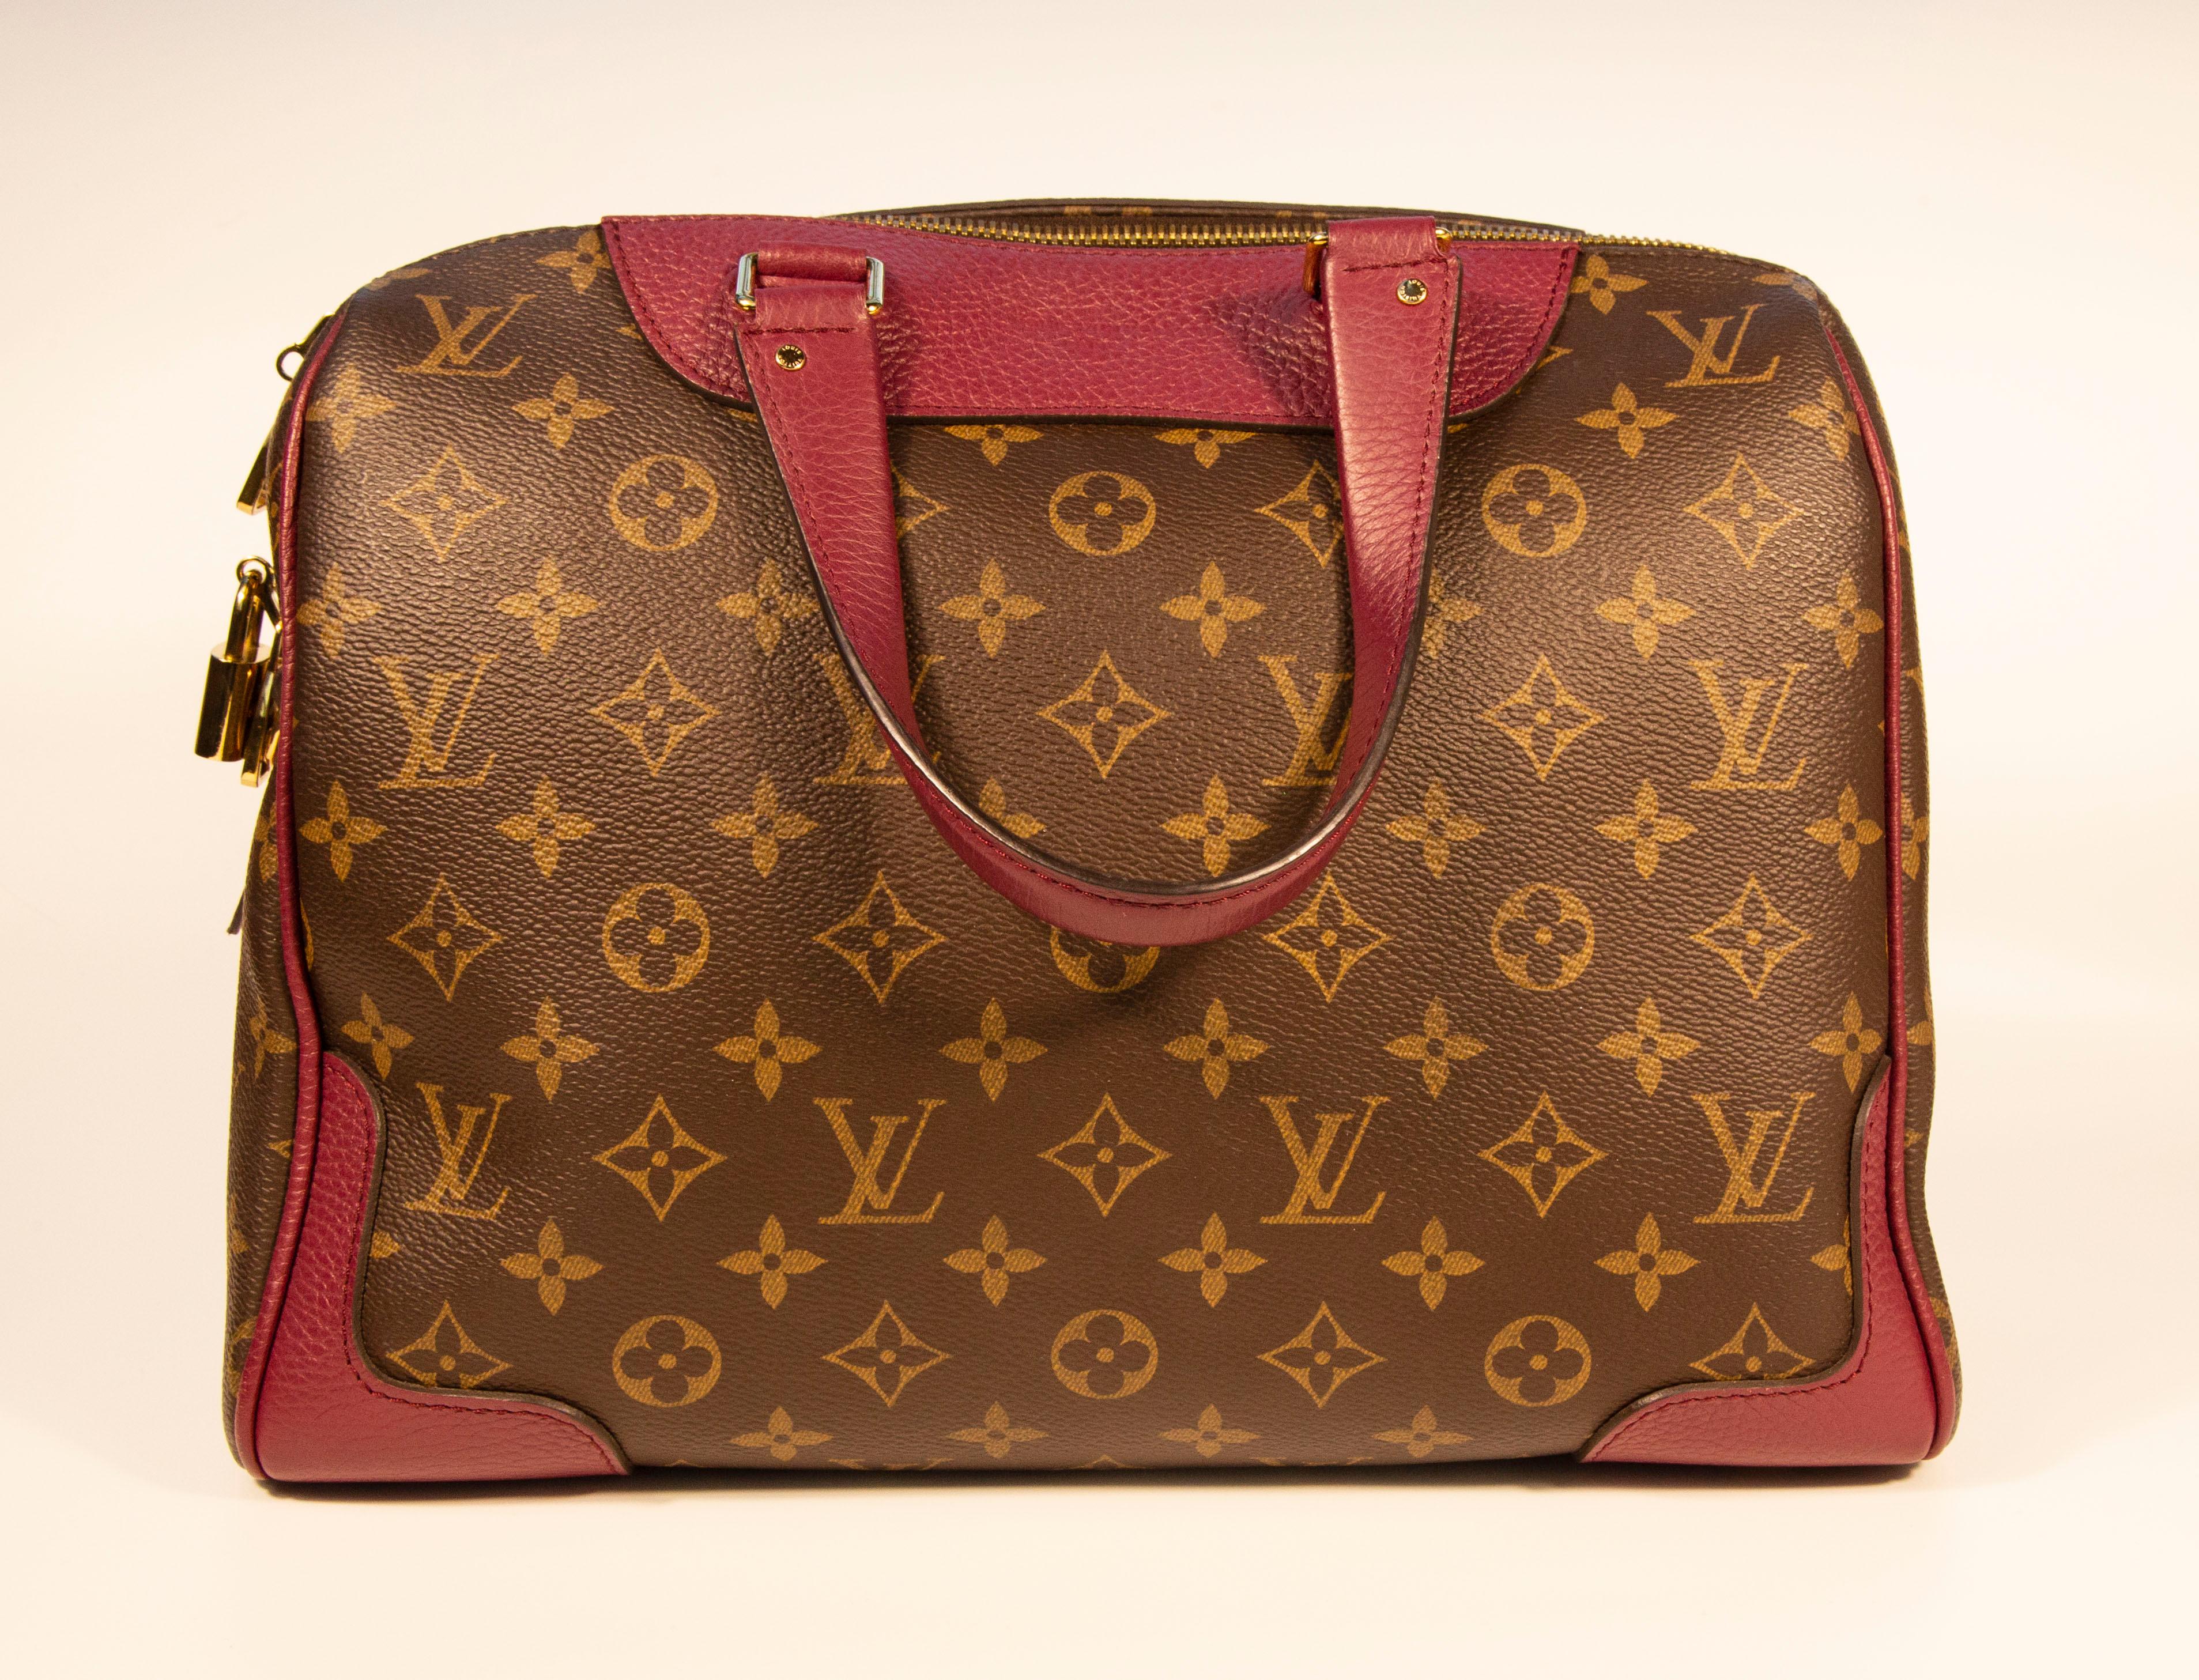 Louis Vuitton Retiro NM Monogram canvas 2way shoulder bag. The bag is made of monogram brown canvas with burgundy leather trim and gold toned hardware. The interior is lined with burgundy fabric and next to the major compartment it features three